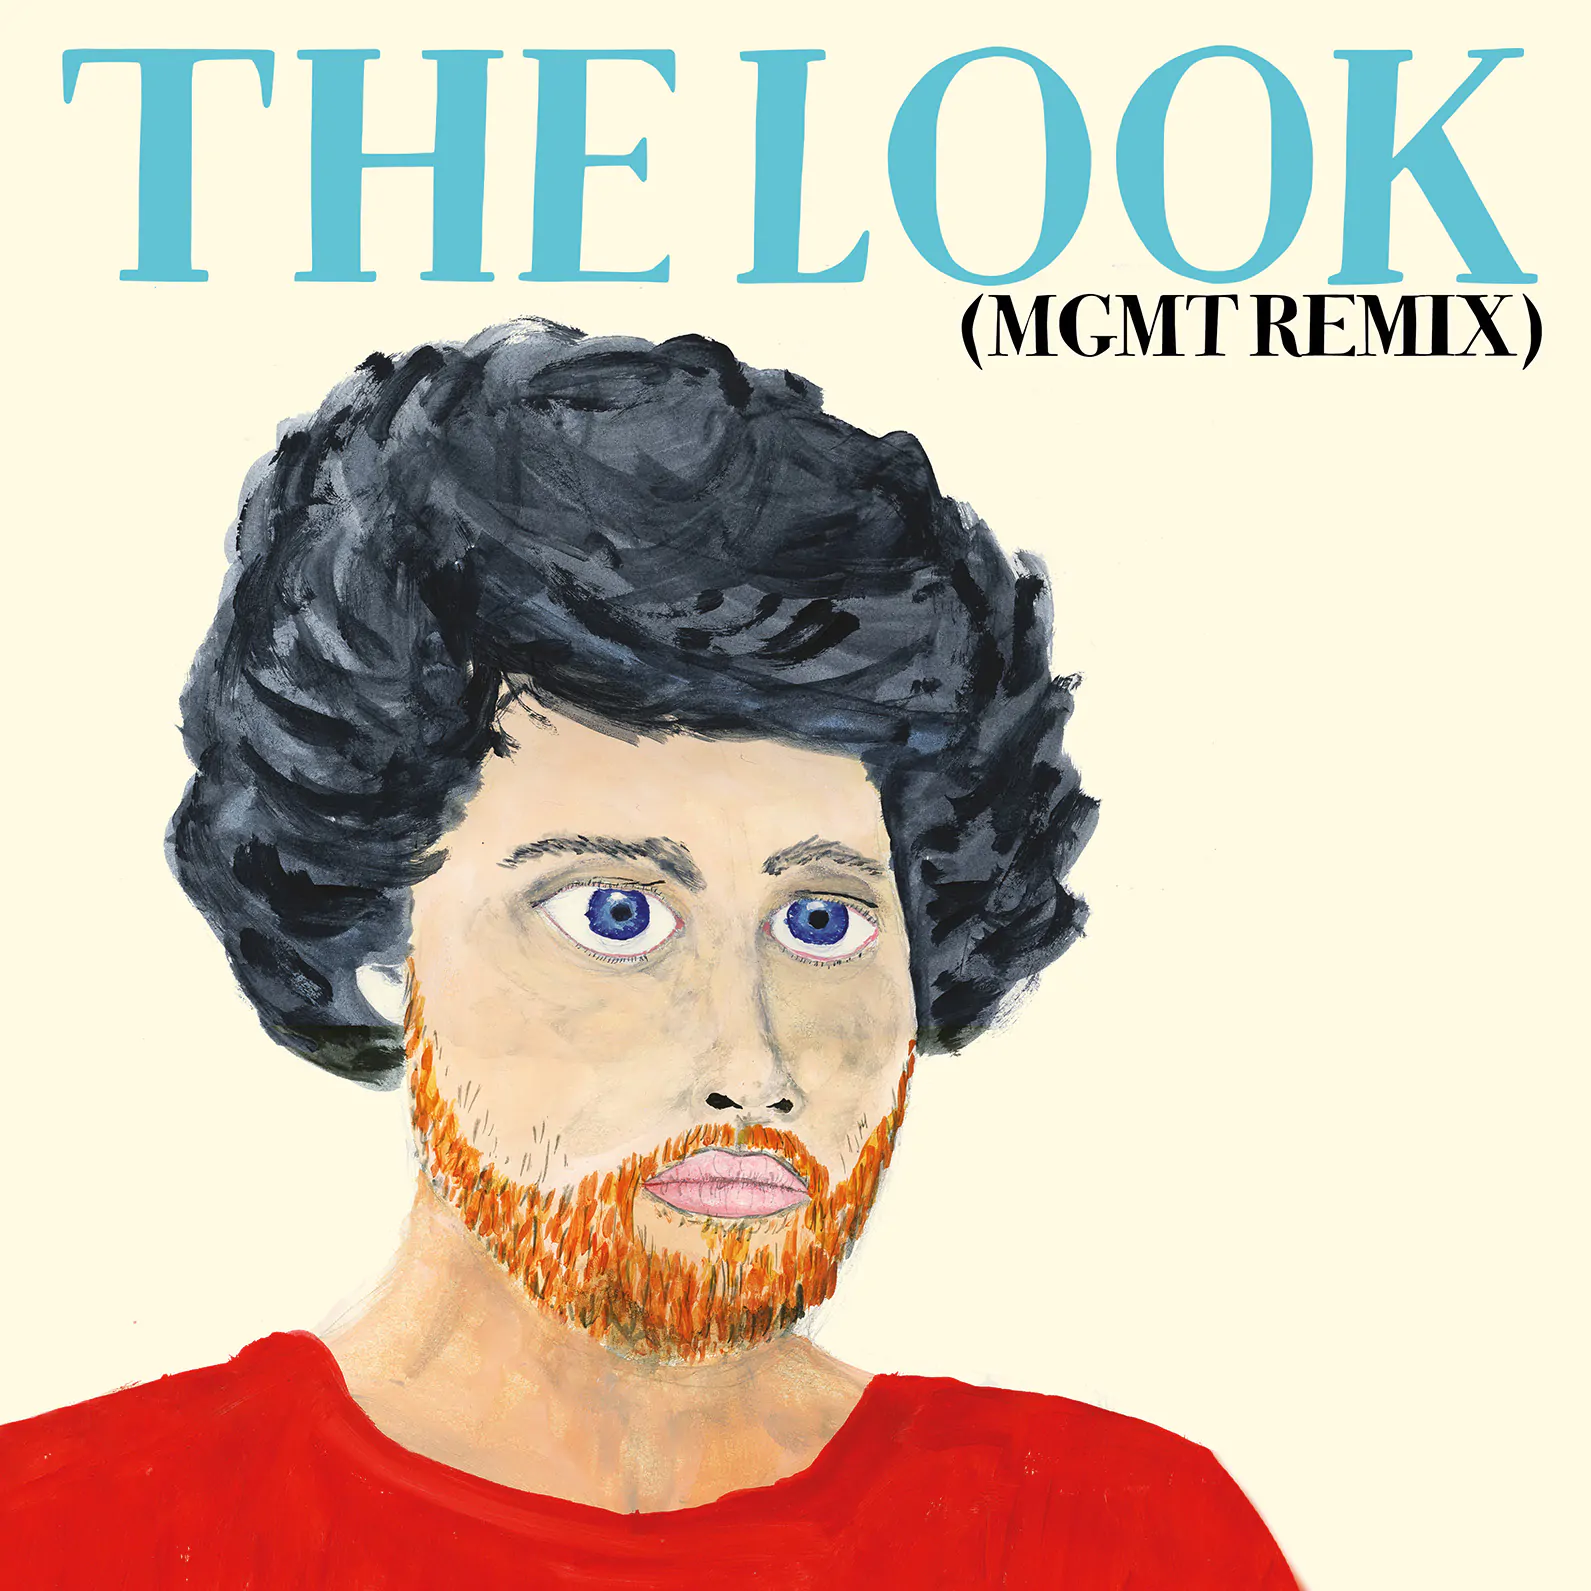 METRONOMY share MGMT remix of ‘The Look’ & announce UK/EU 2022 tour dates